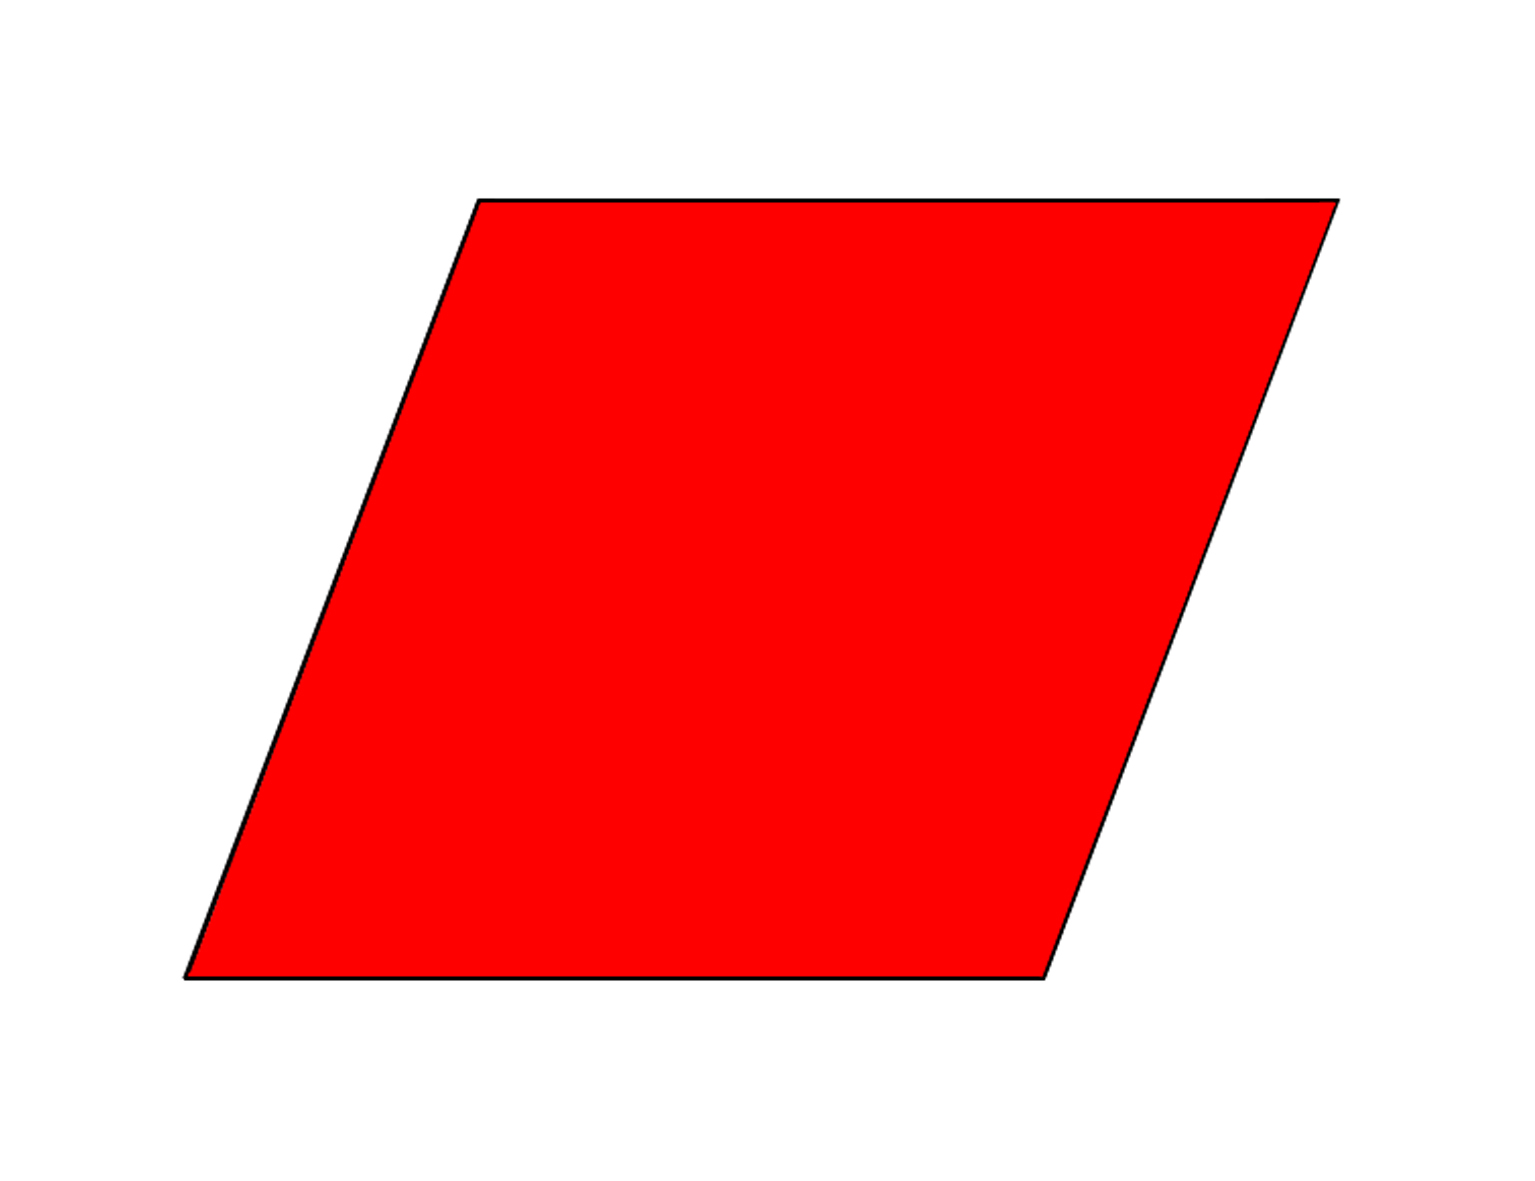 parallelogram-shape-in-real-life-clipart-best-clipart-best